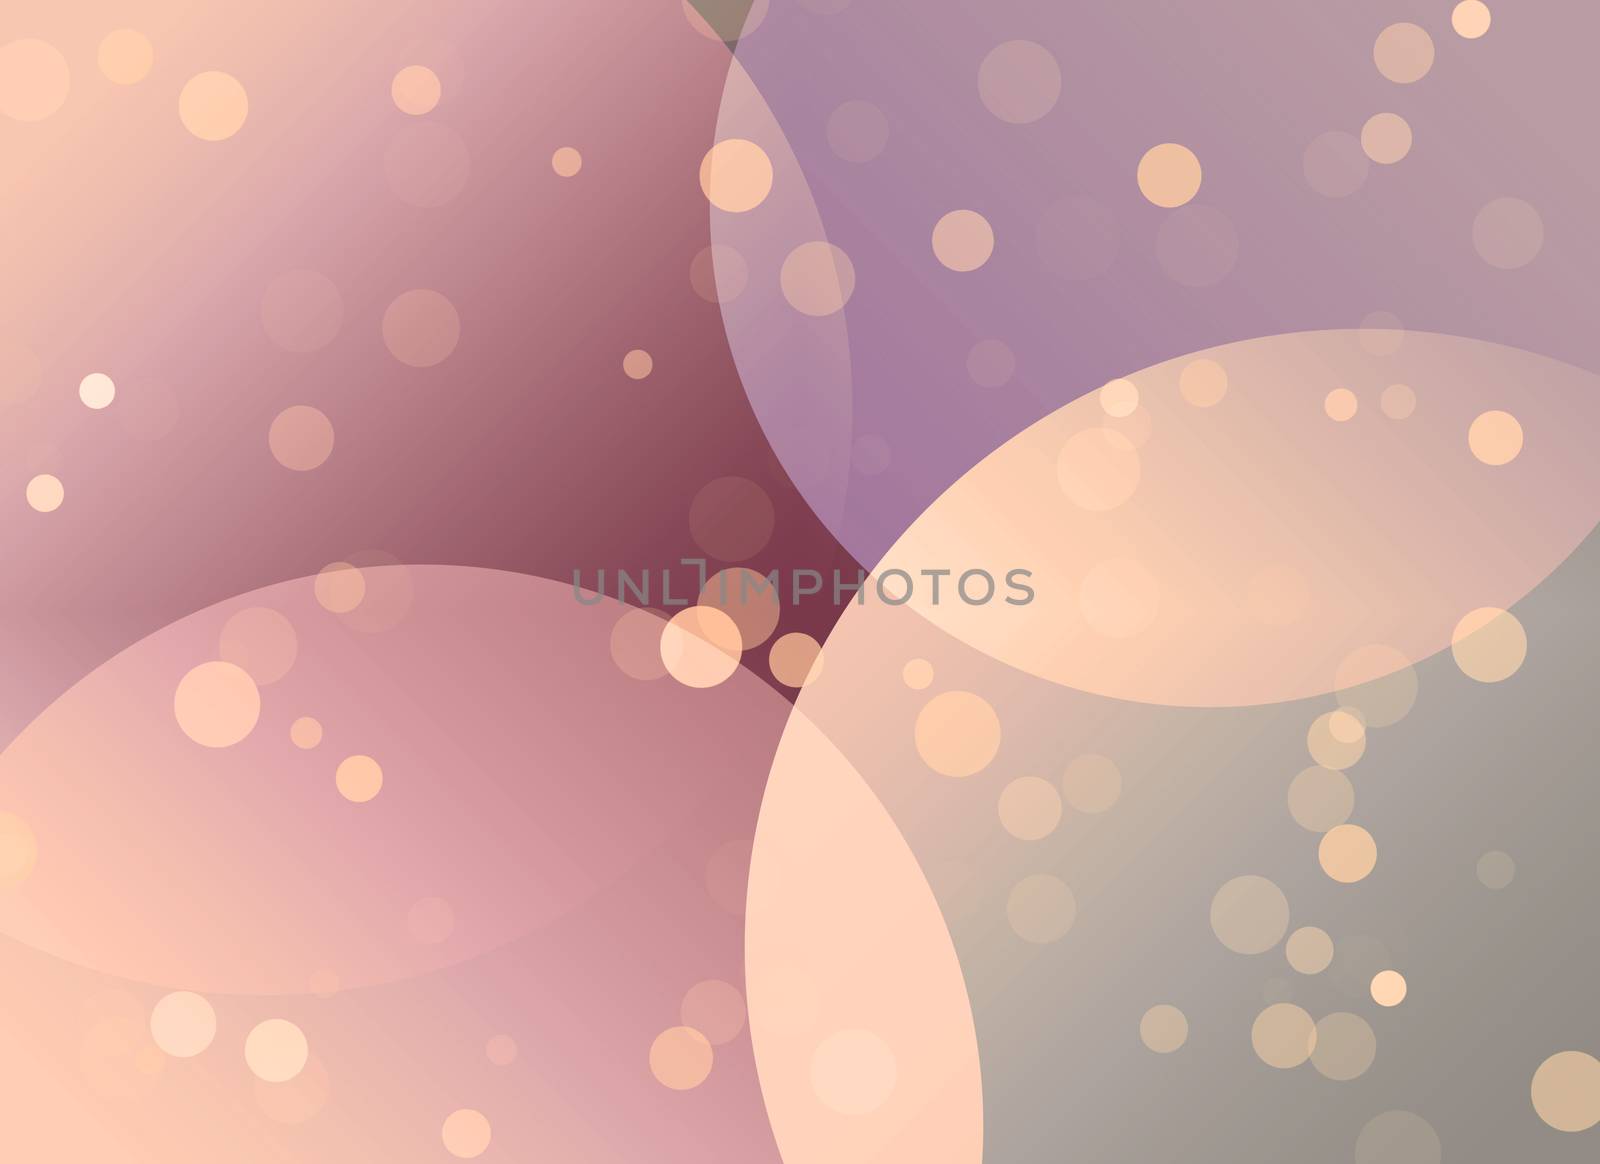 Circles in soft colors by applesstock